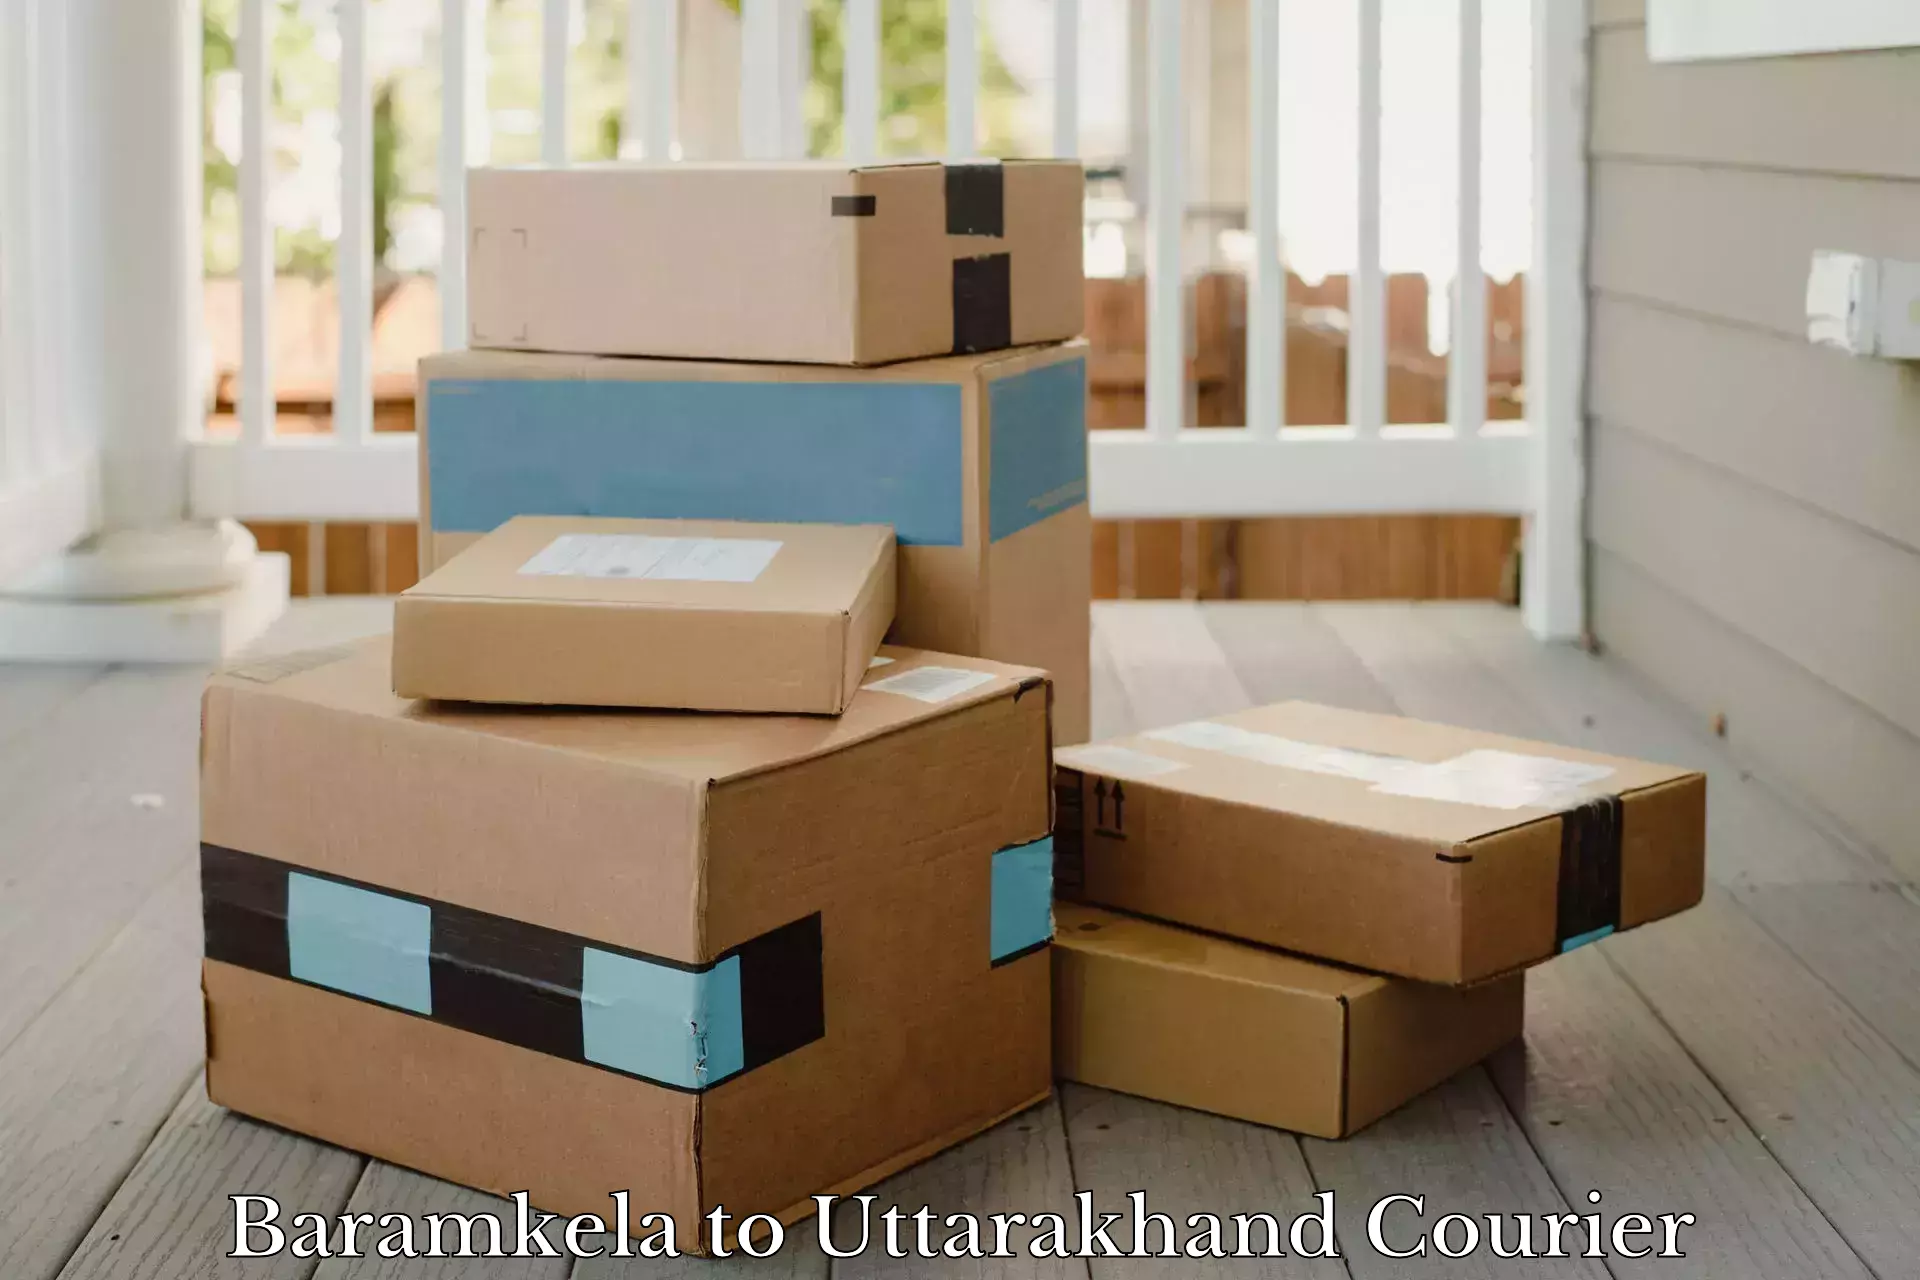 Quality courier services in Baramkela to Lansdowne